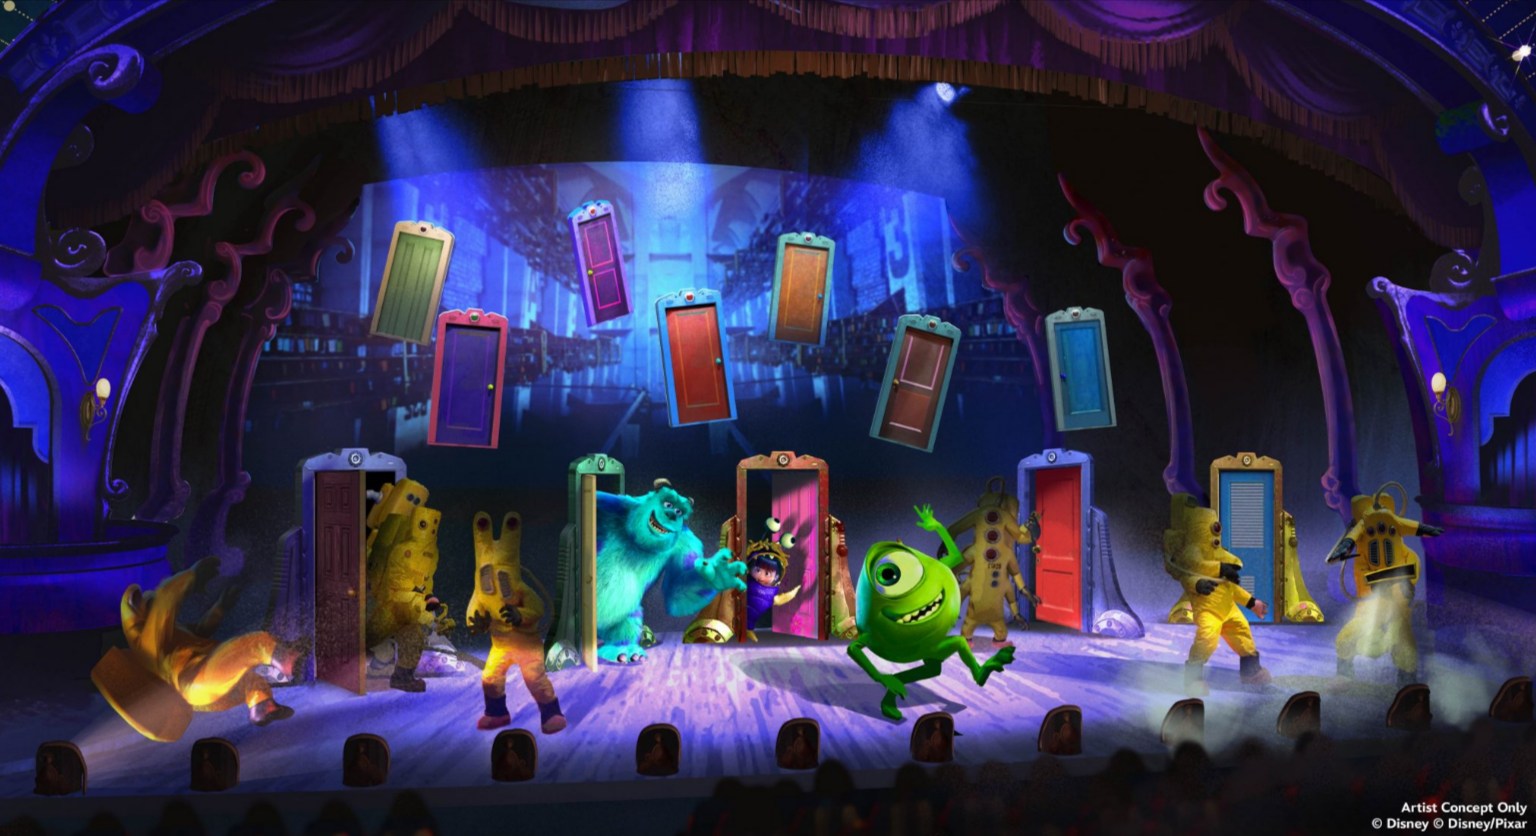 “Pixar: We Belong Together”, this new show will highlight how friendship and family bring and keep us. It will combine spectacular stage technology, state-of-the-art video and lighting design, and a large cast of characters from many beloved Pixar films.